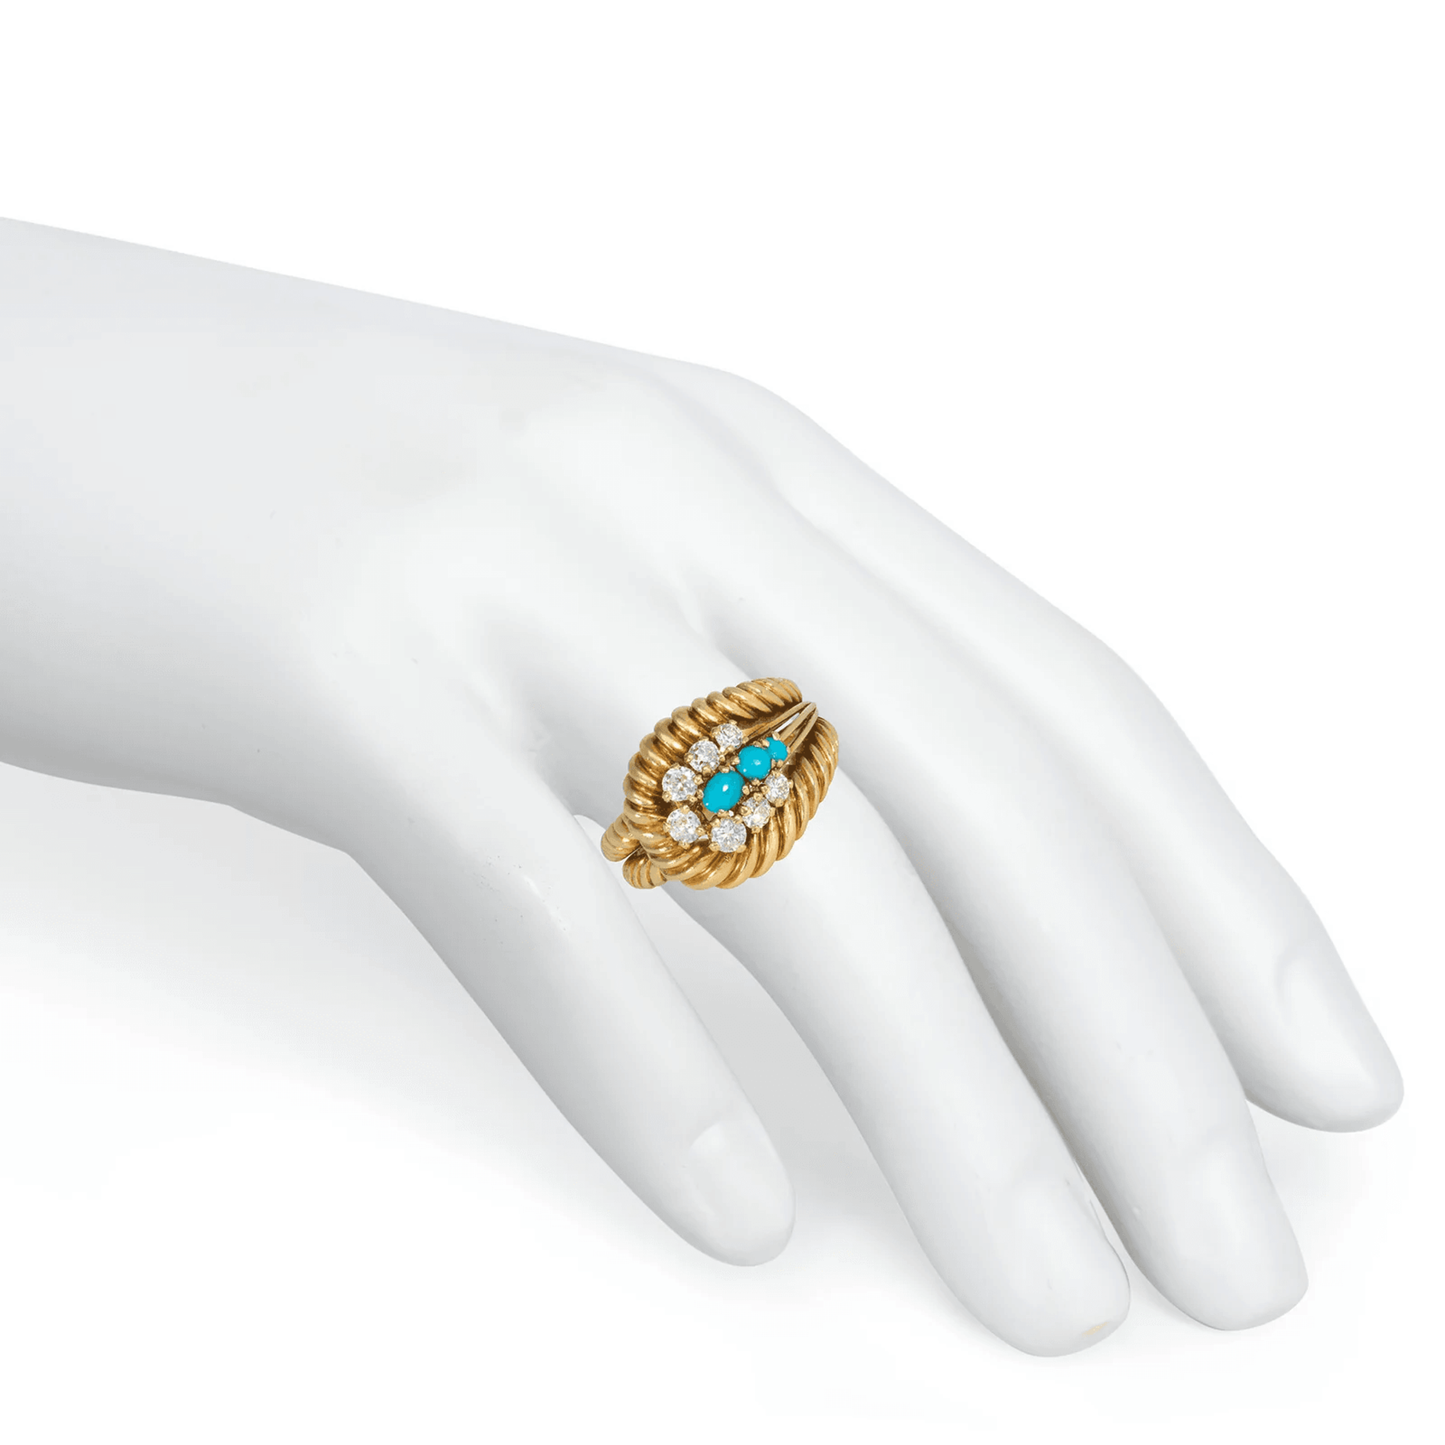 Cartier 1960s 18KT Yellow Gold Diamond & Turquoise Ring on finger